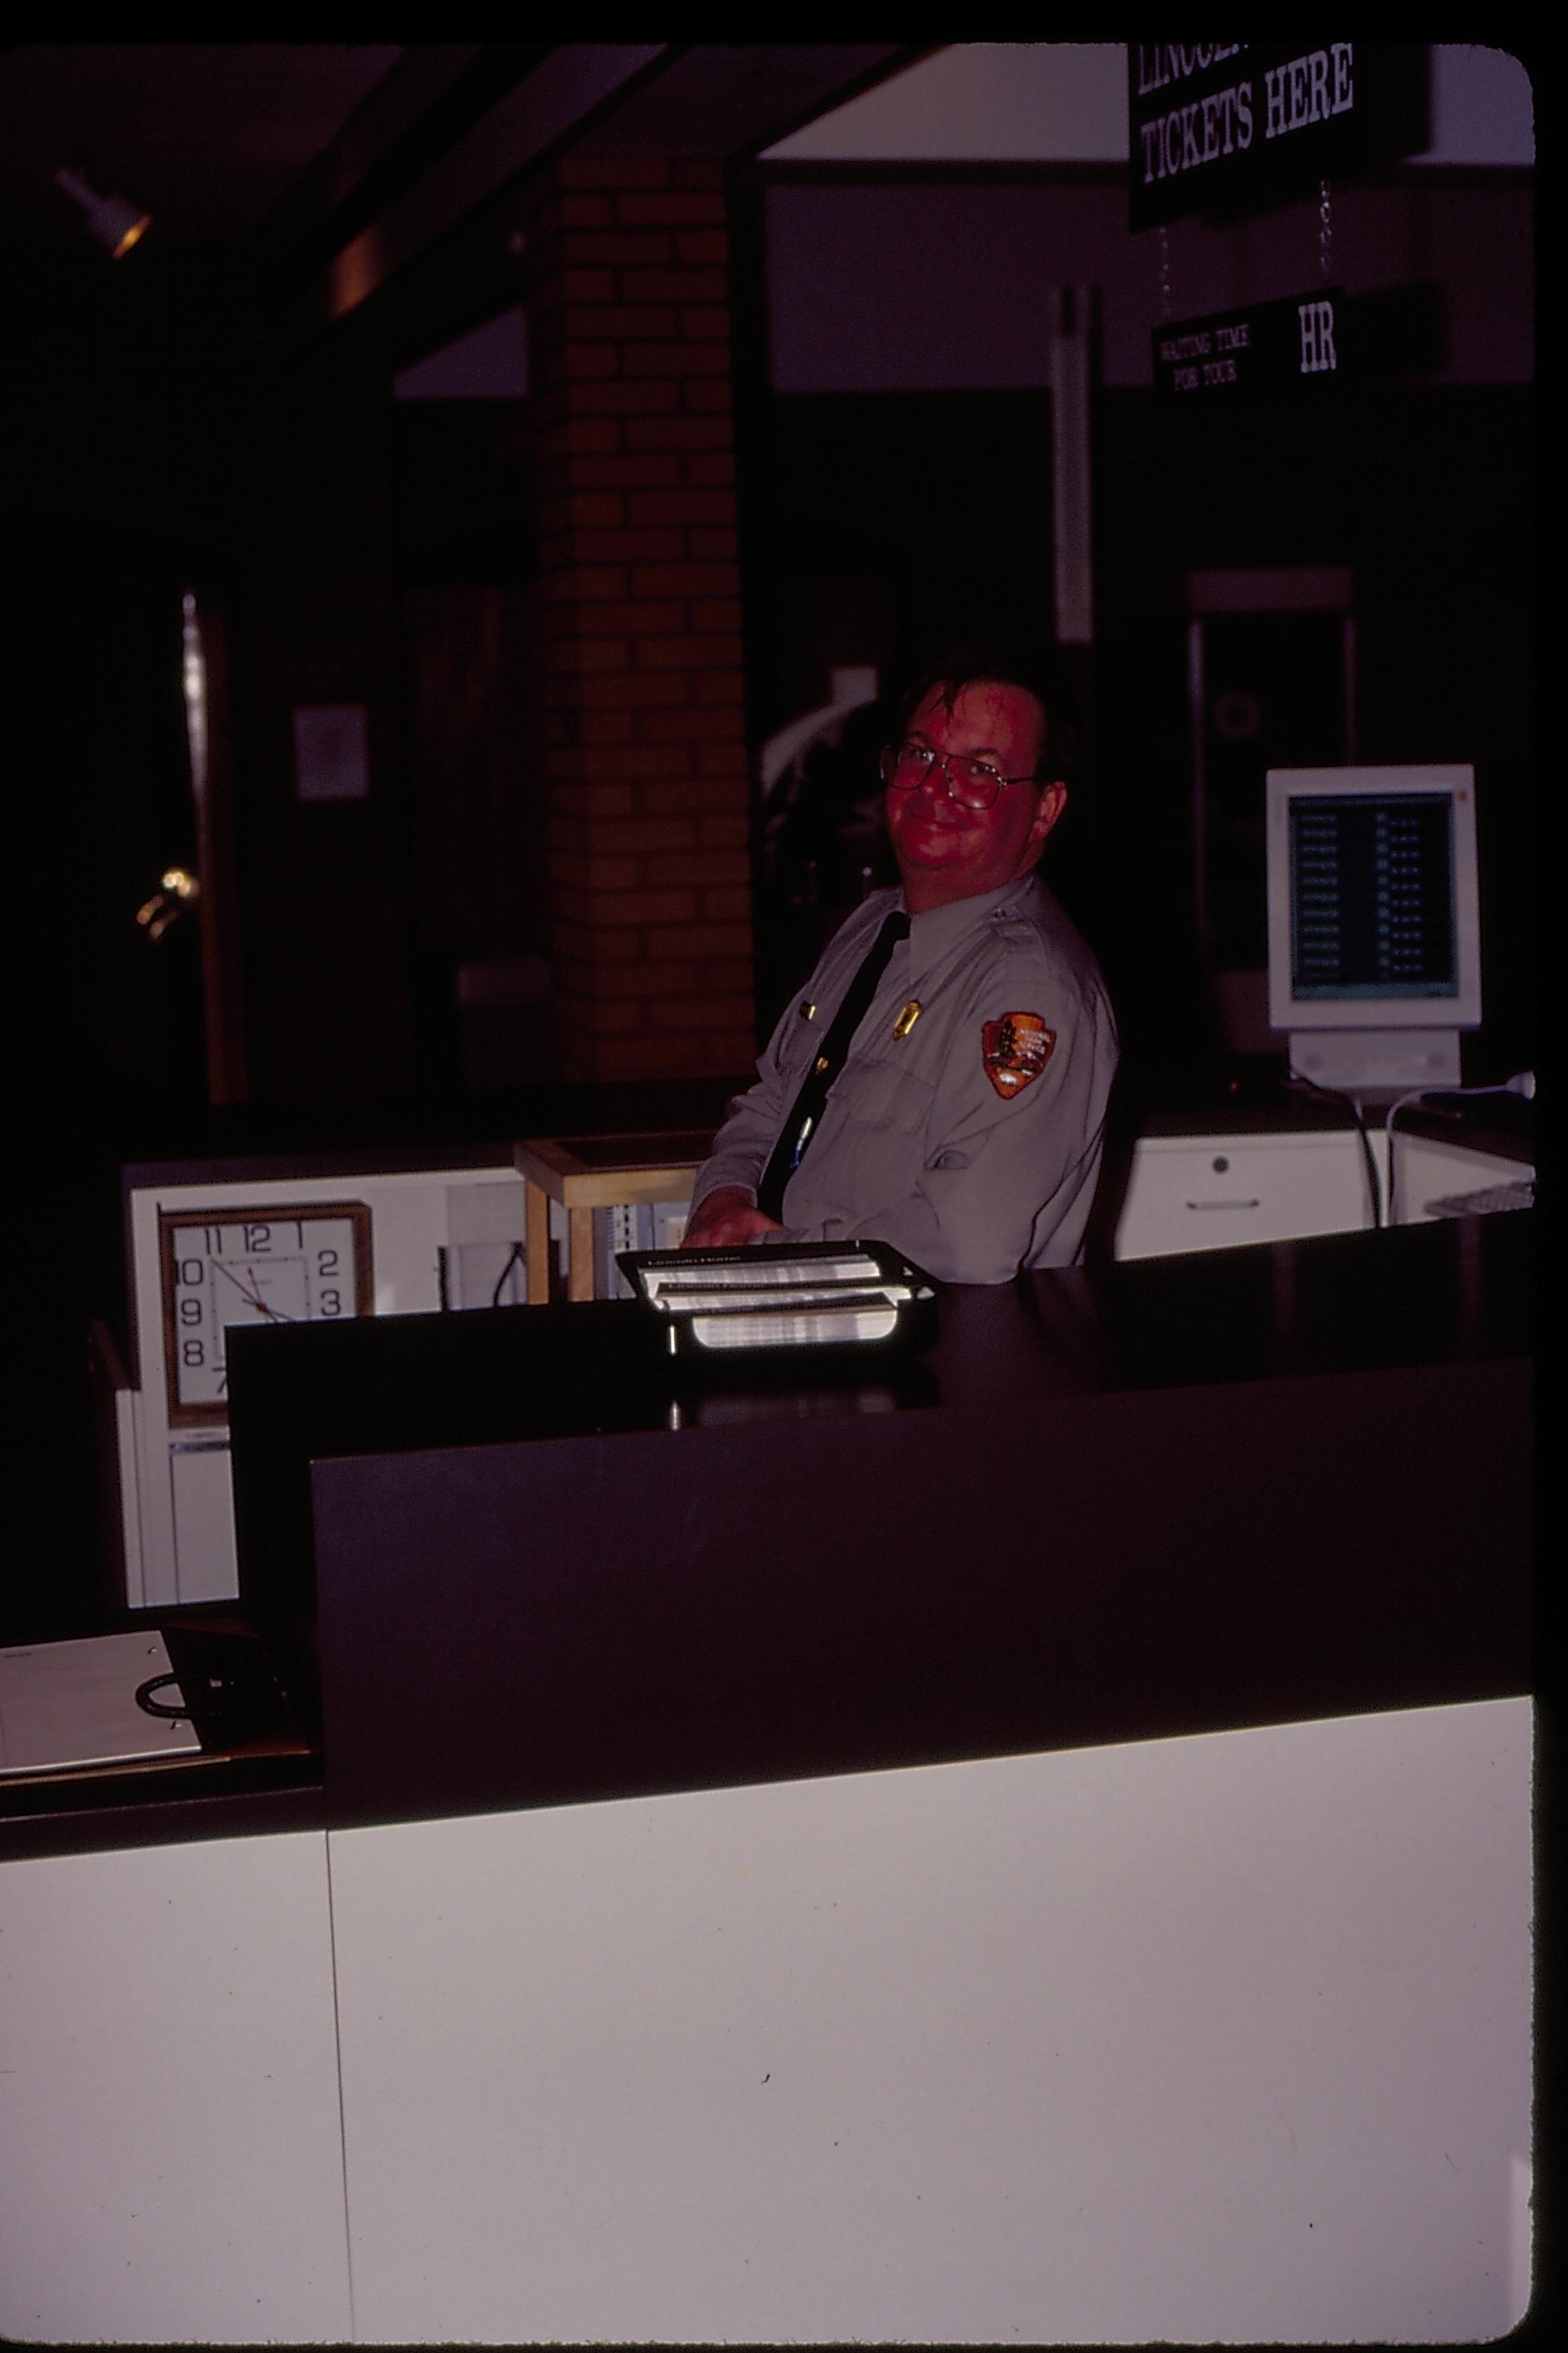 Farewell party for Dept. Supt. Larry Blake: Ranger Jim Ranslow at former boat front desk.  Some elements of the ticket system visible in background Looking Northwest (?) staff, Visitor Center, information desk, farewell